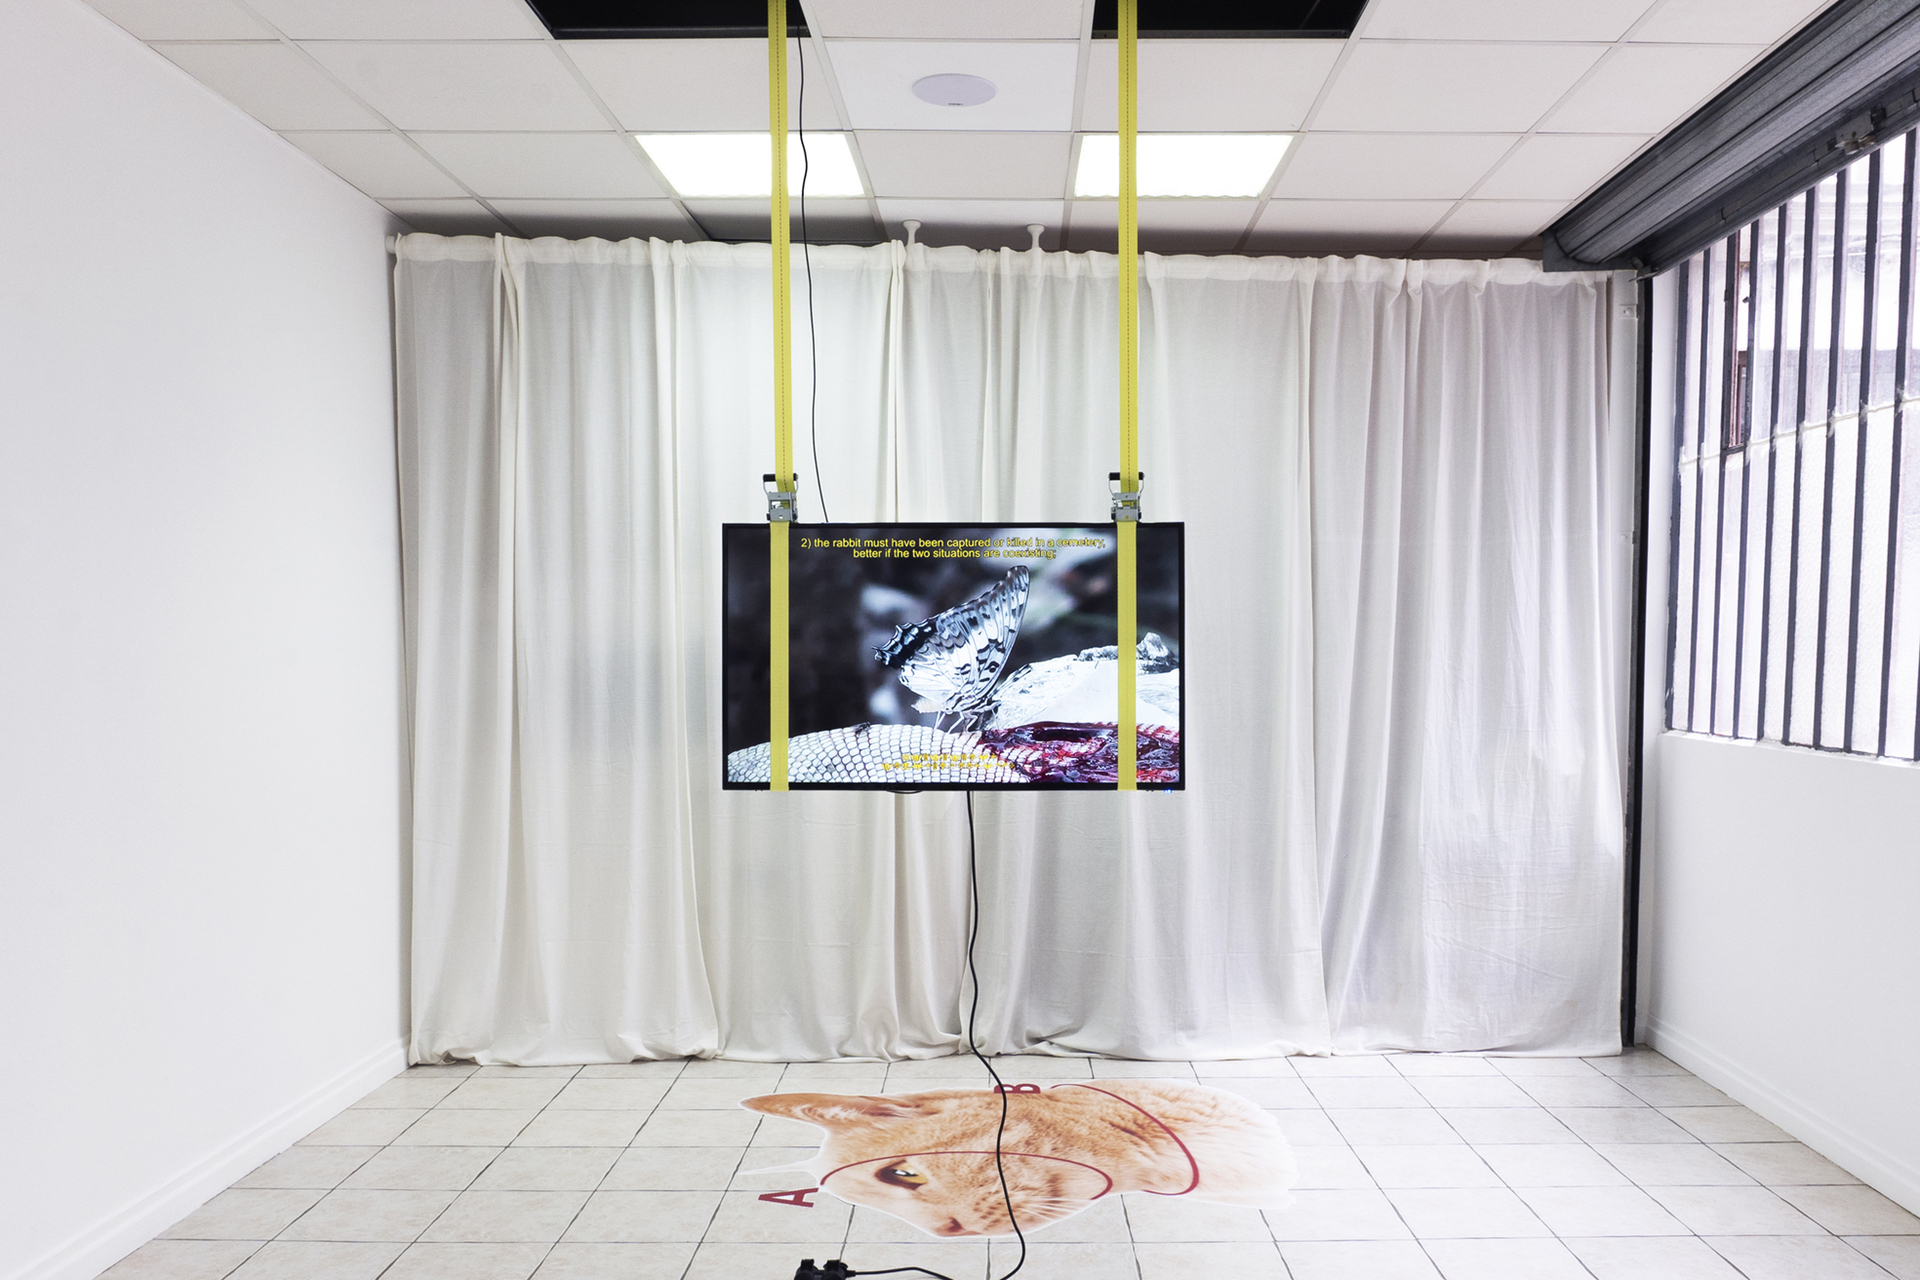 Wisrah Villefort, Untitled, 2020 (video 7m55s, monitor, extensions, printed media, wires & straps)